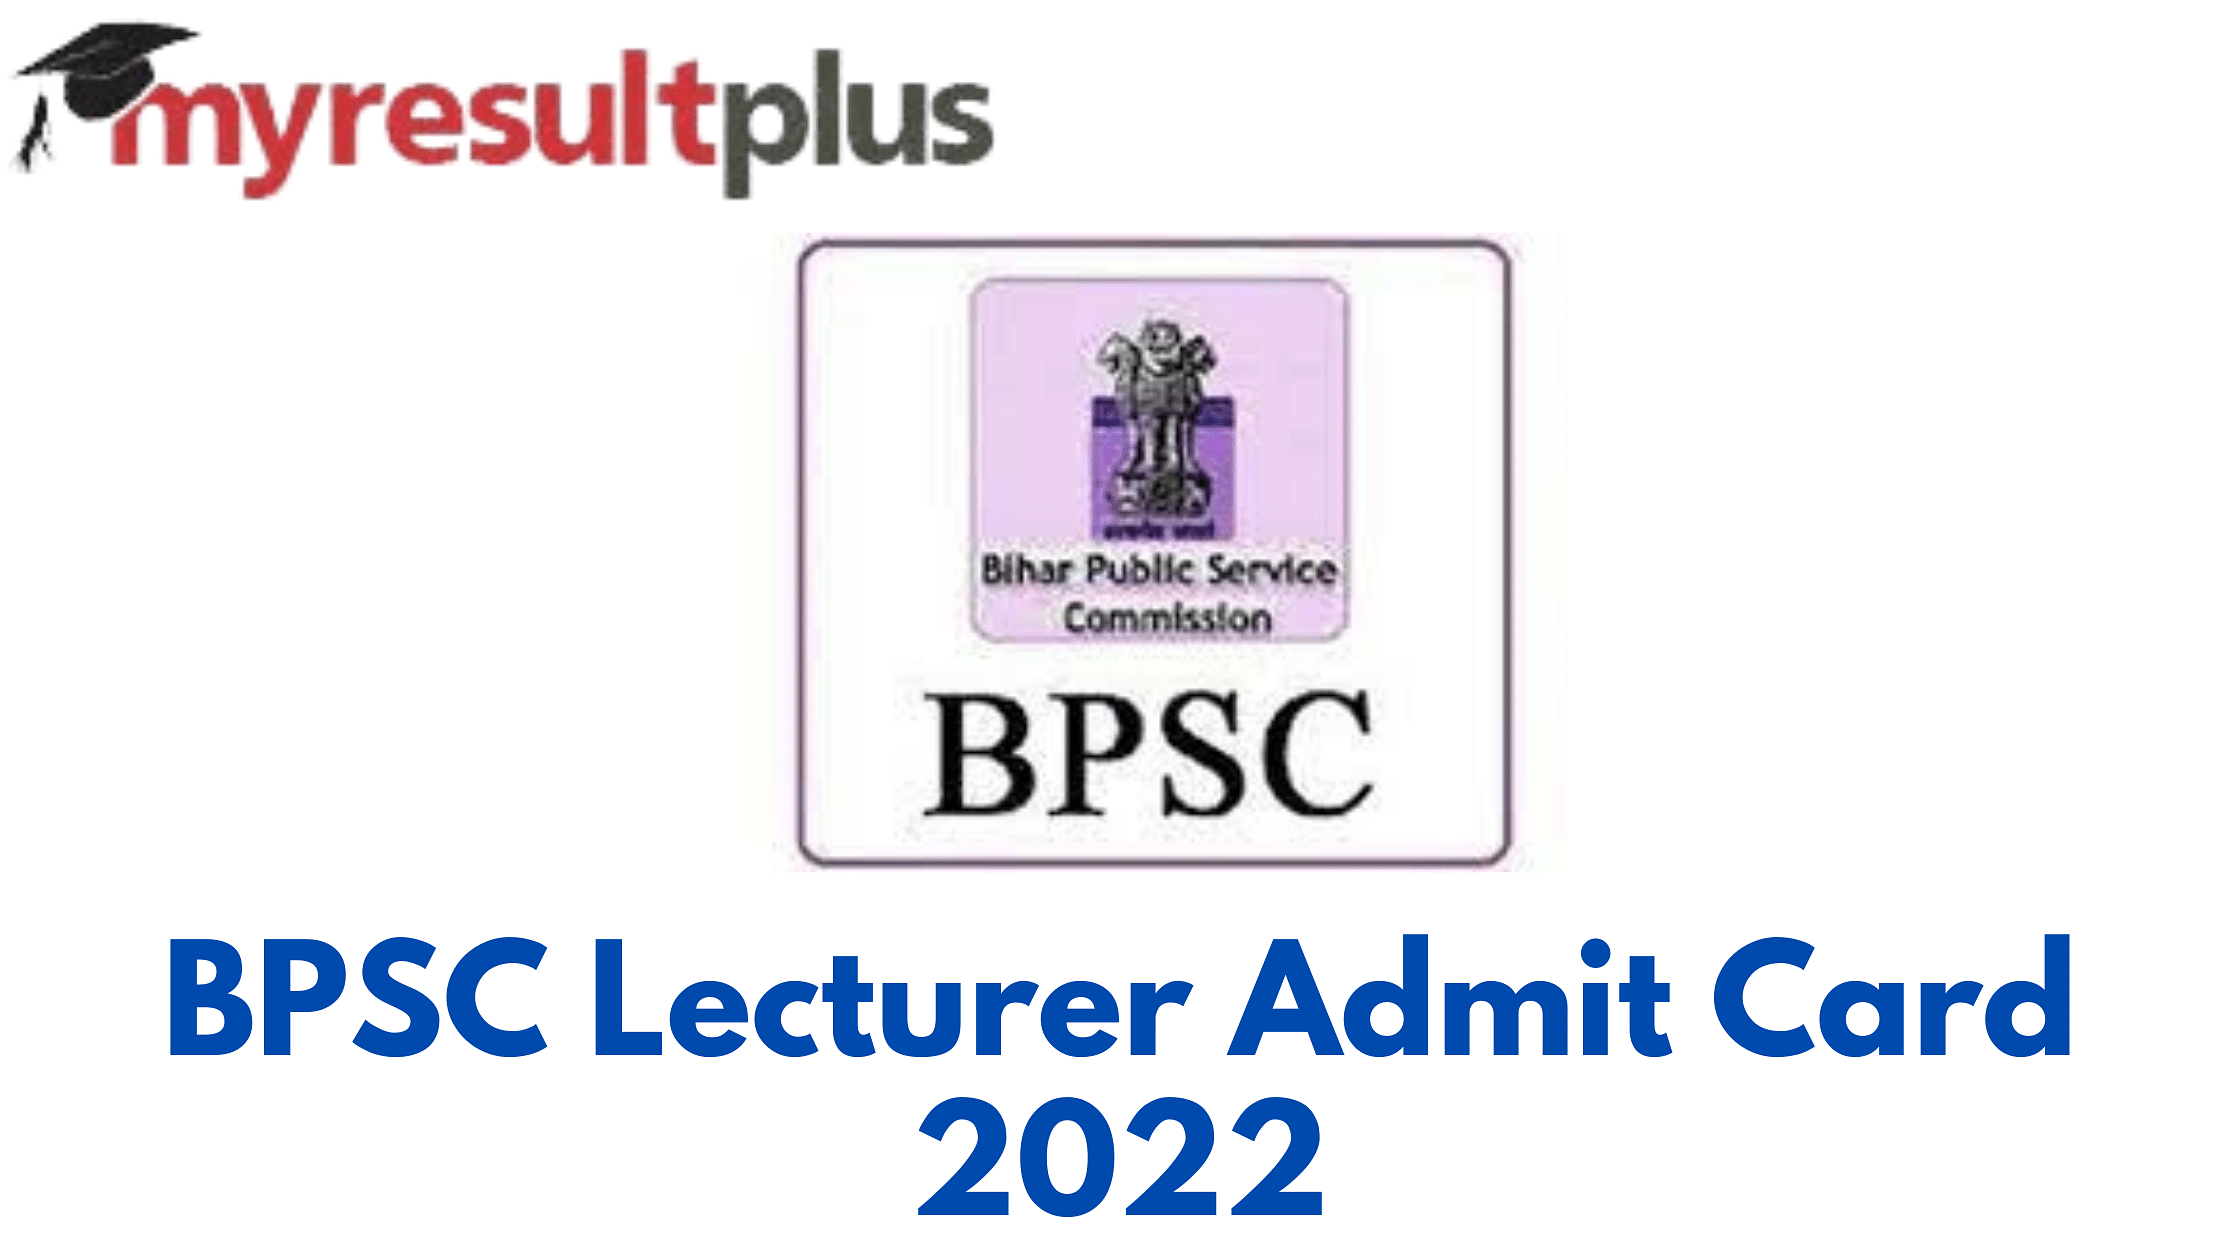 BPSC Lecturer Admit Card 2022 Released, Direct Link to Download Here